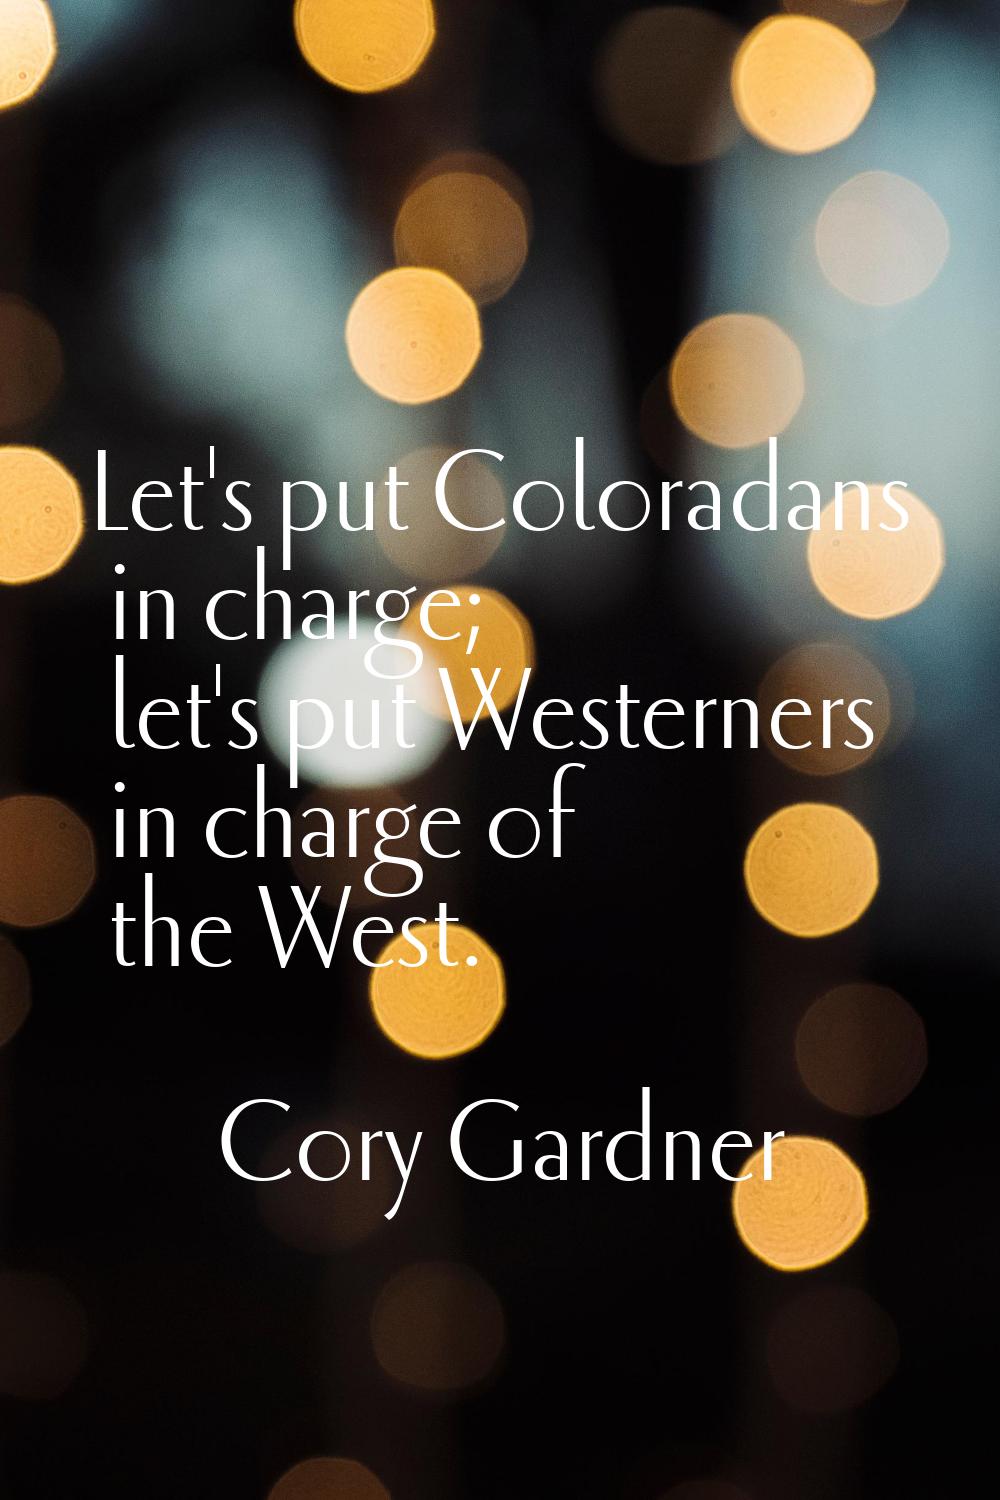 Let's put Coloradans in charge; let's put Westerners in charge of the West.